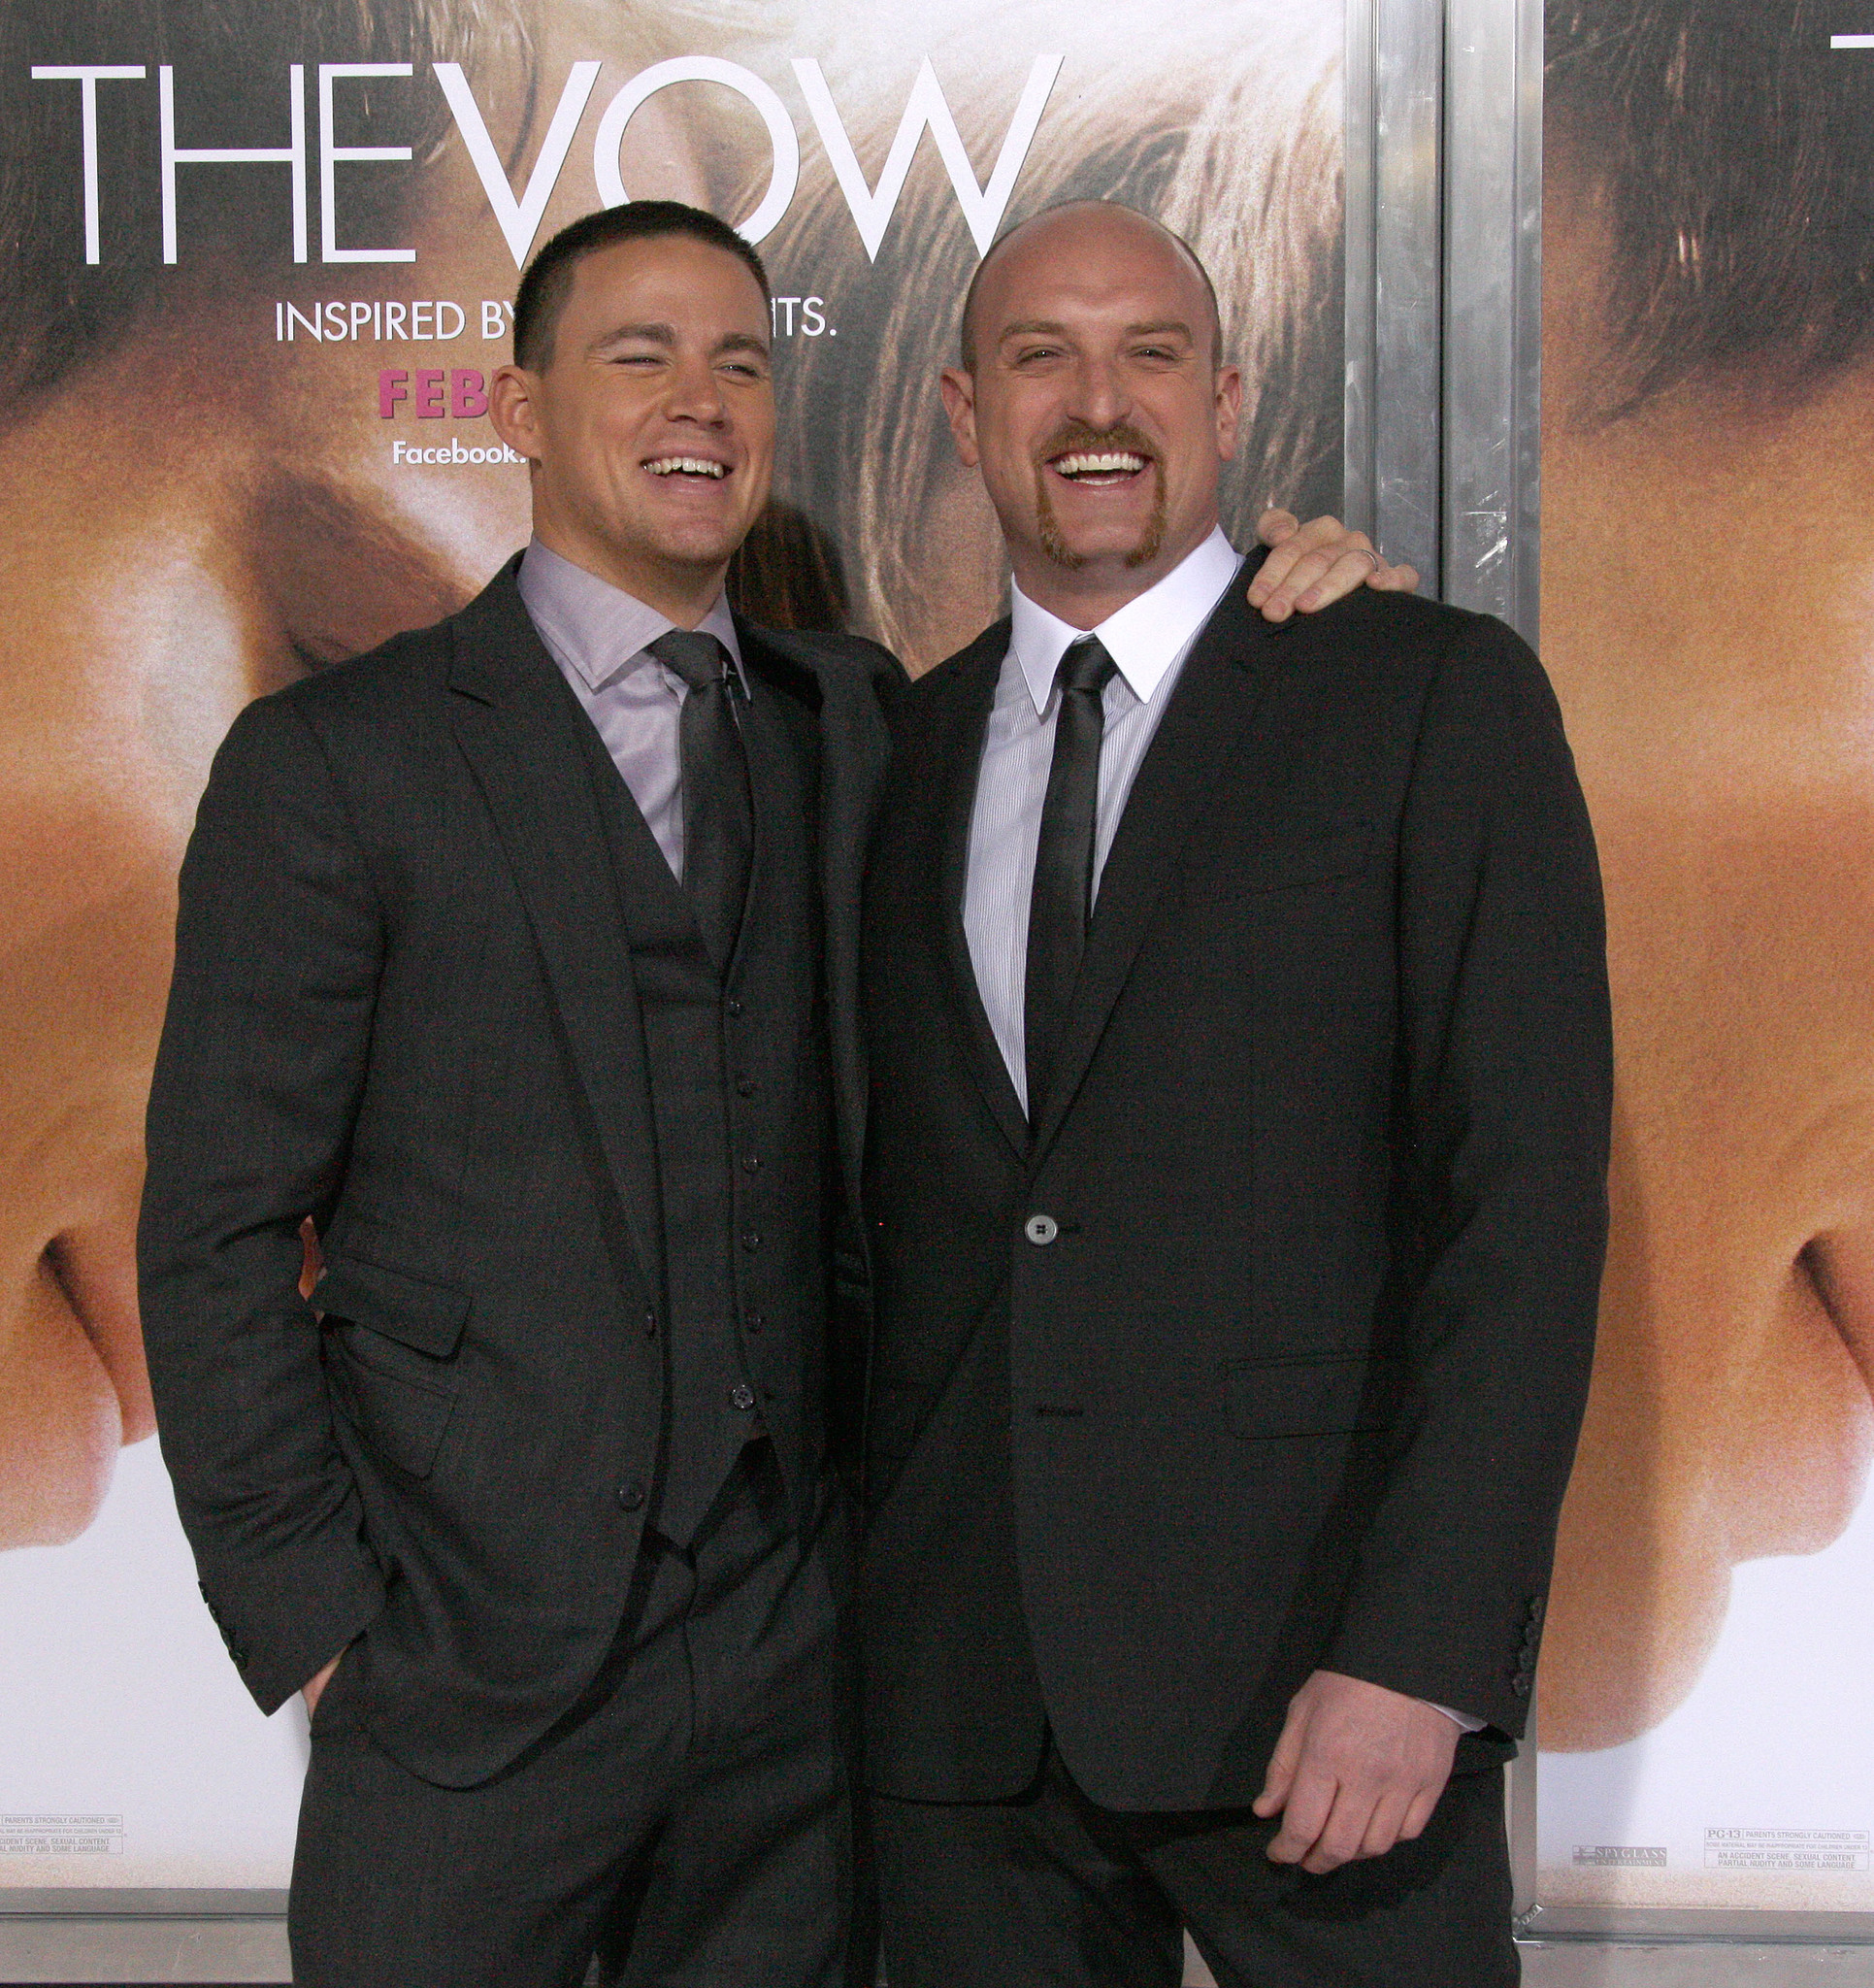 Michael Sucsy and Channing Tatum at event of Meiles priesaika (2012)